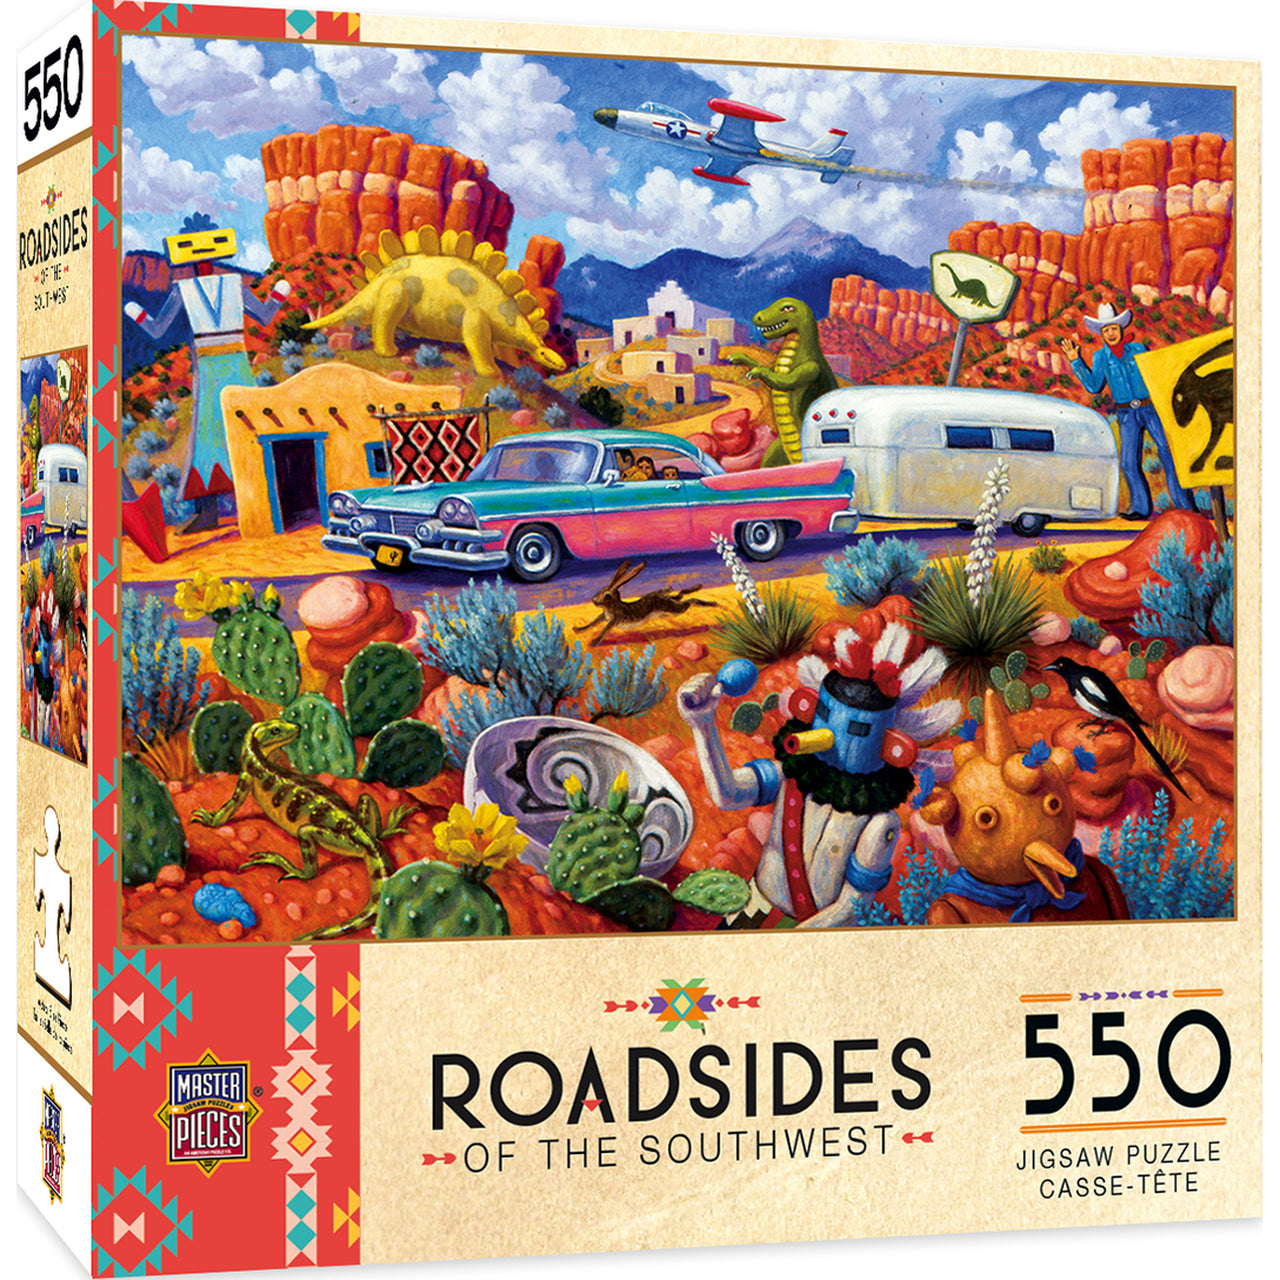 Roadsides of the Southwest - Off the Beaten Path - 550 Piece Jigsaw Puzzle by Masterpieces